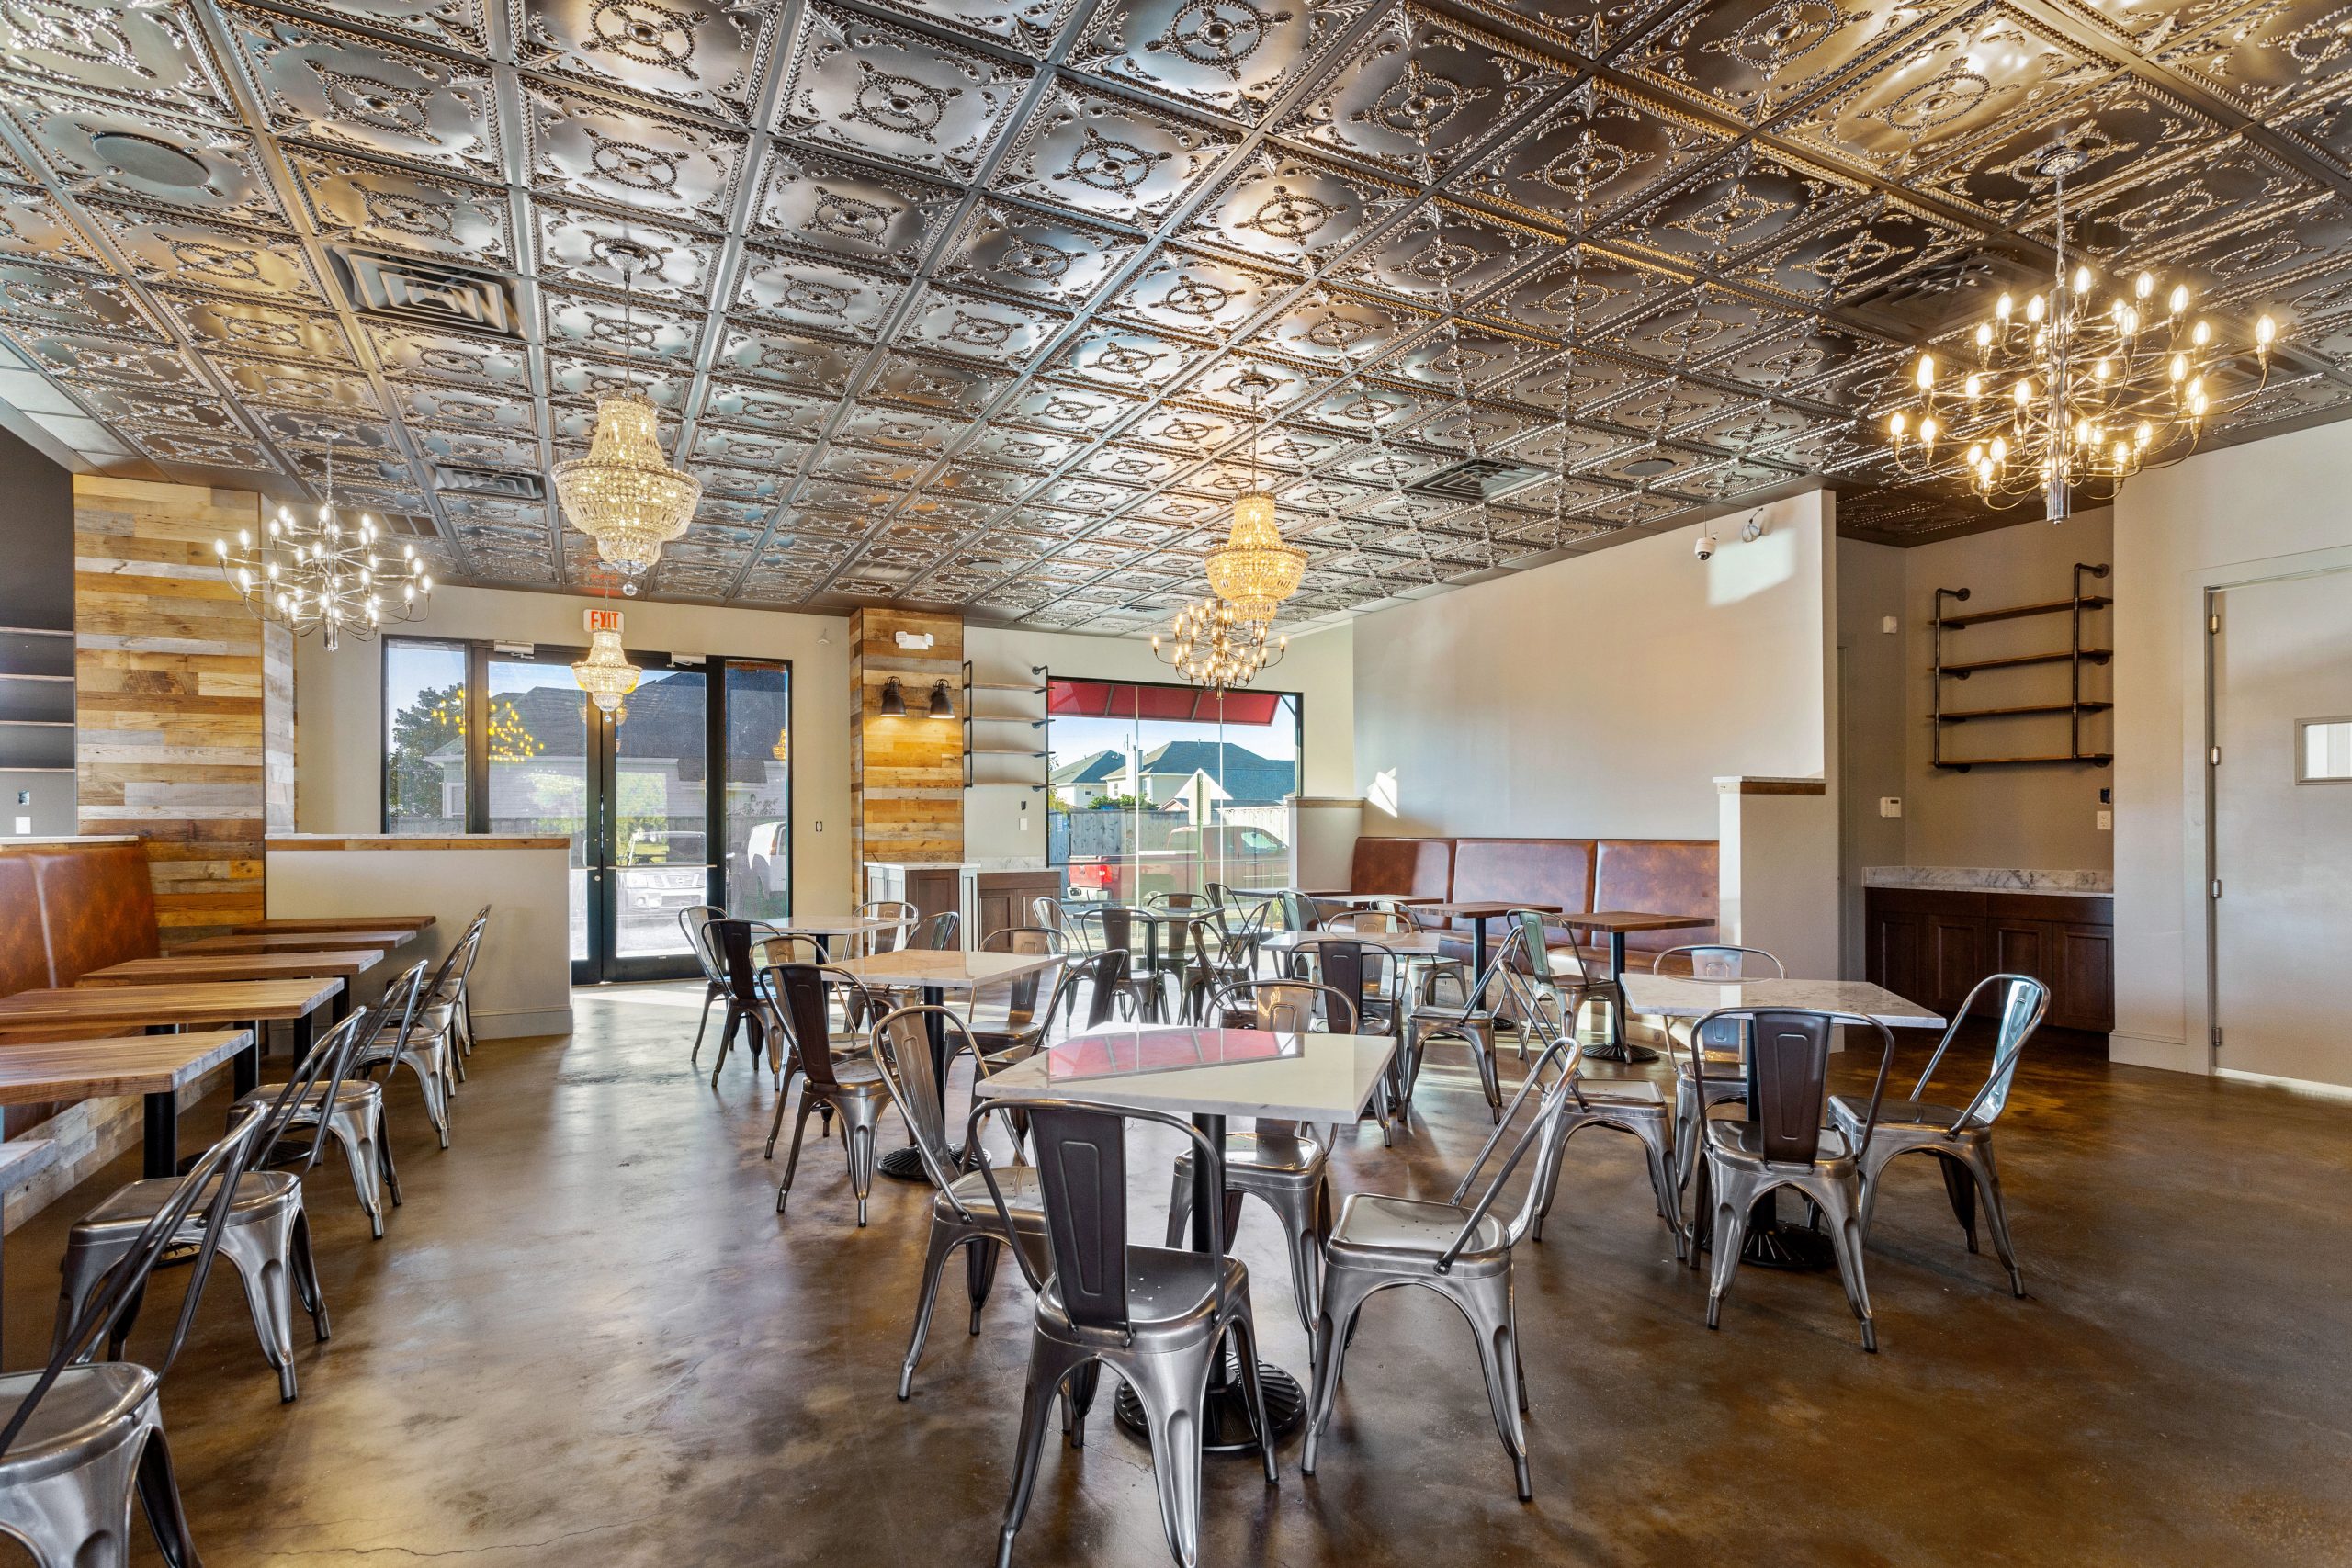 Pizza Domenica Restaurant Lakeview interior dining area designed and built by DMG's commercial construction division